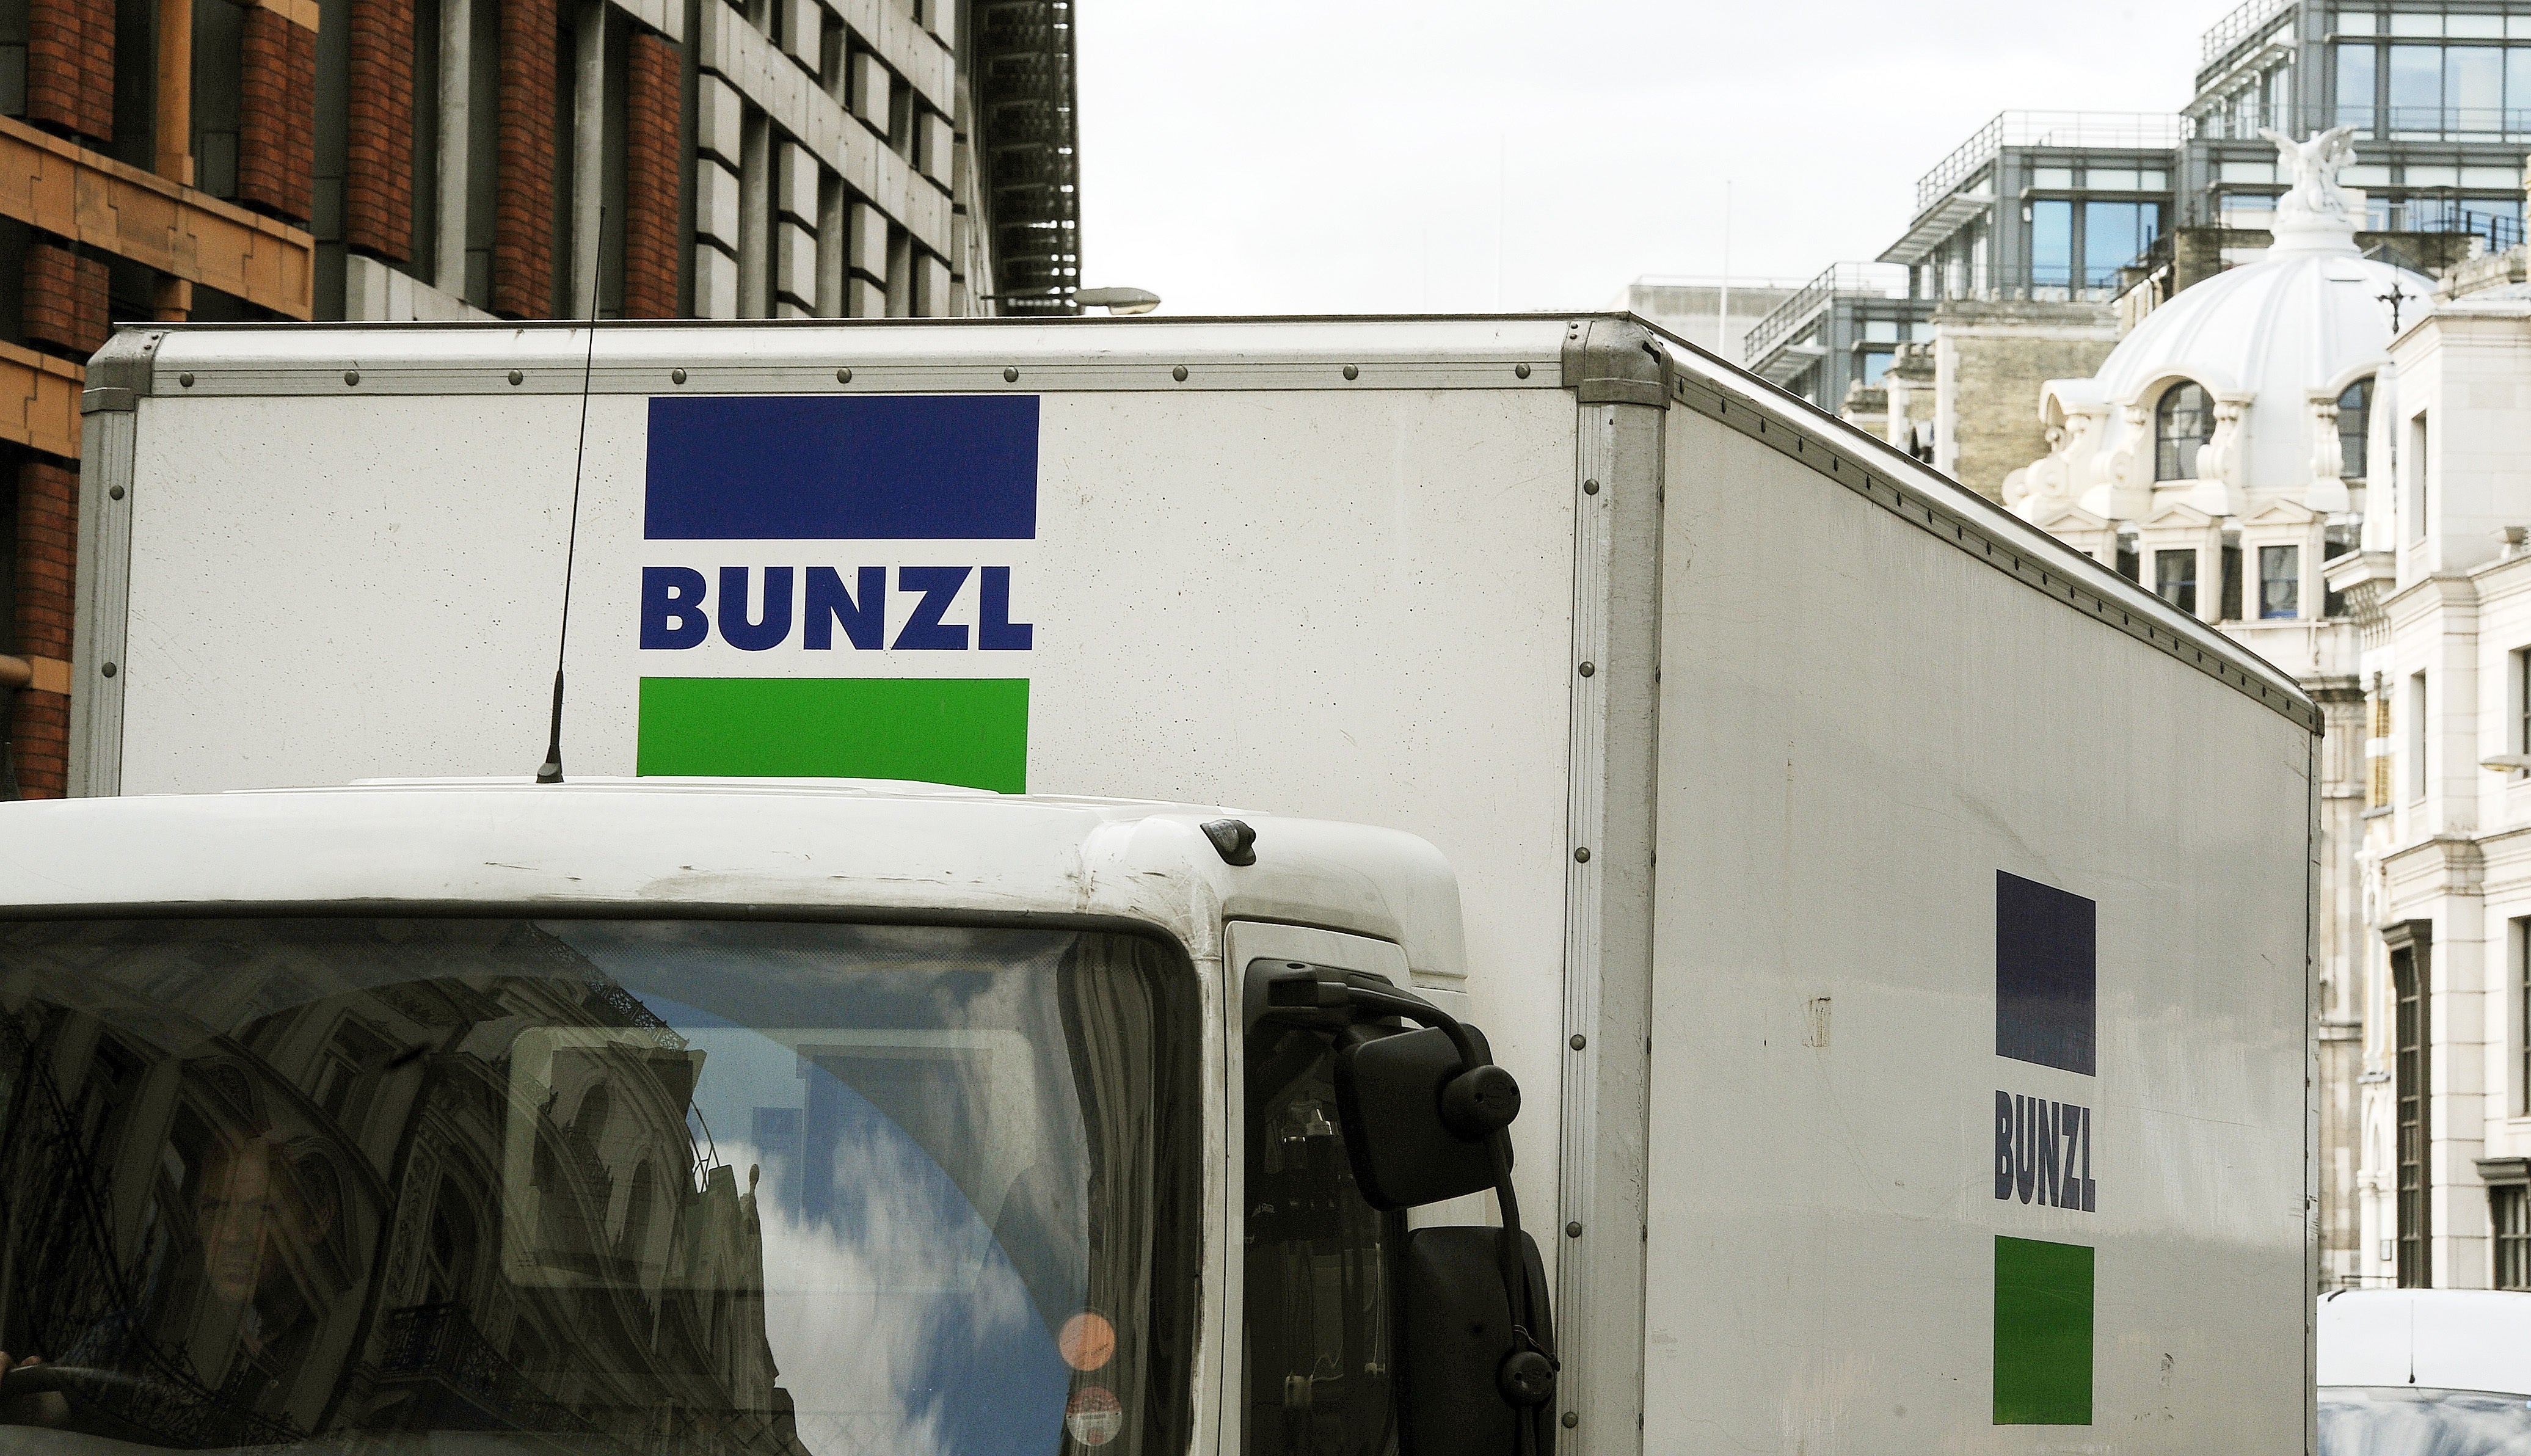 Distribution and outsourcing group Bunzl has upped its profitability outlook (John Stillwell/PA)